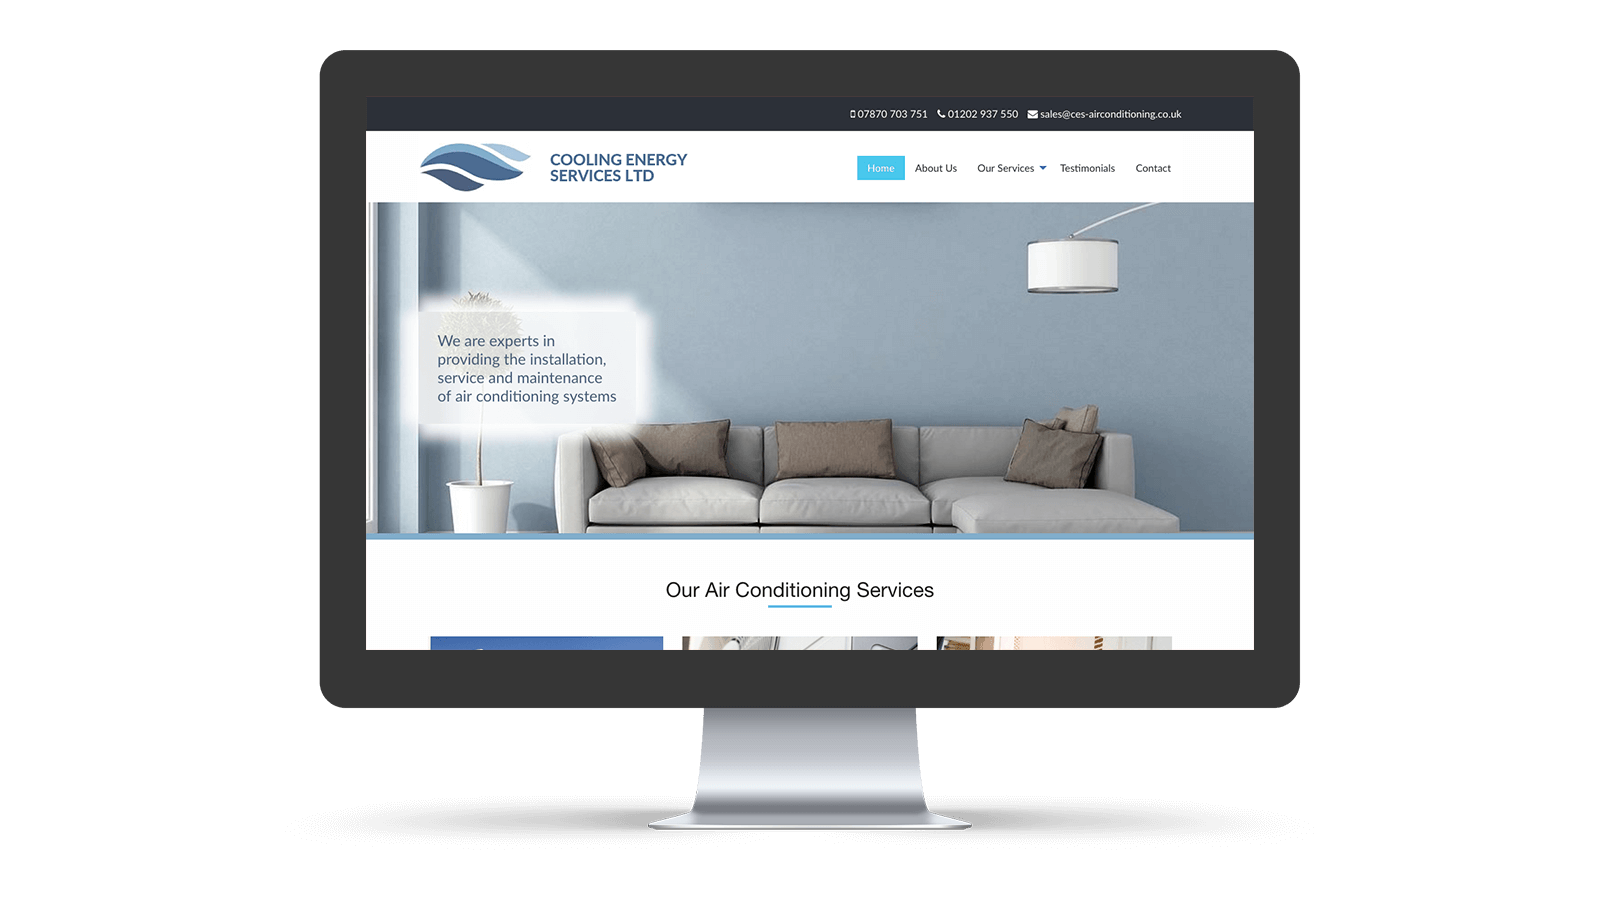 Cooling Energy Services home page design